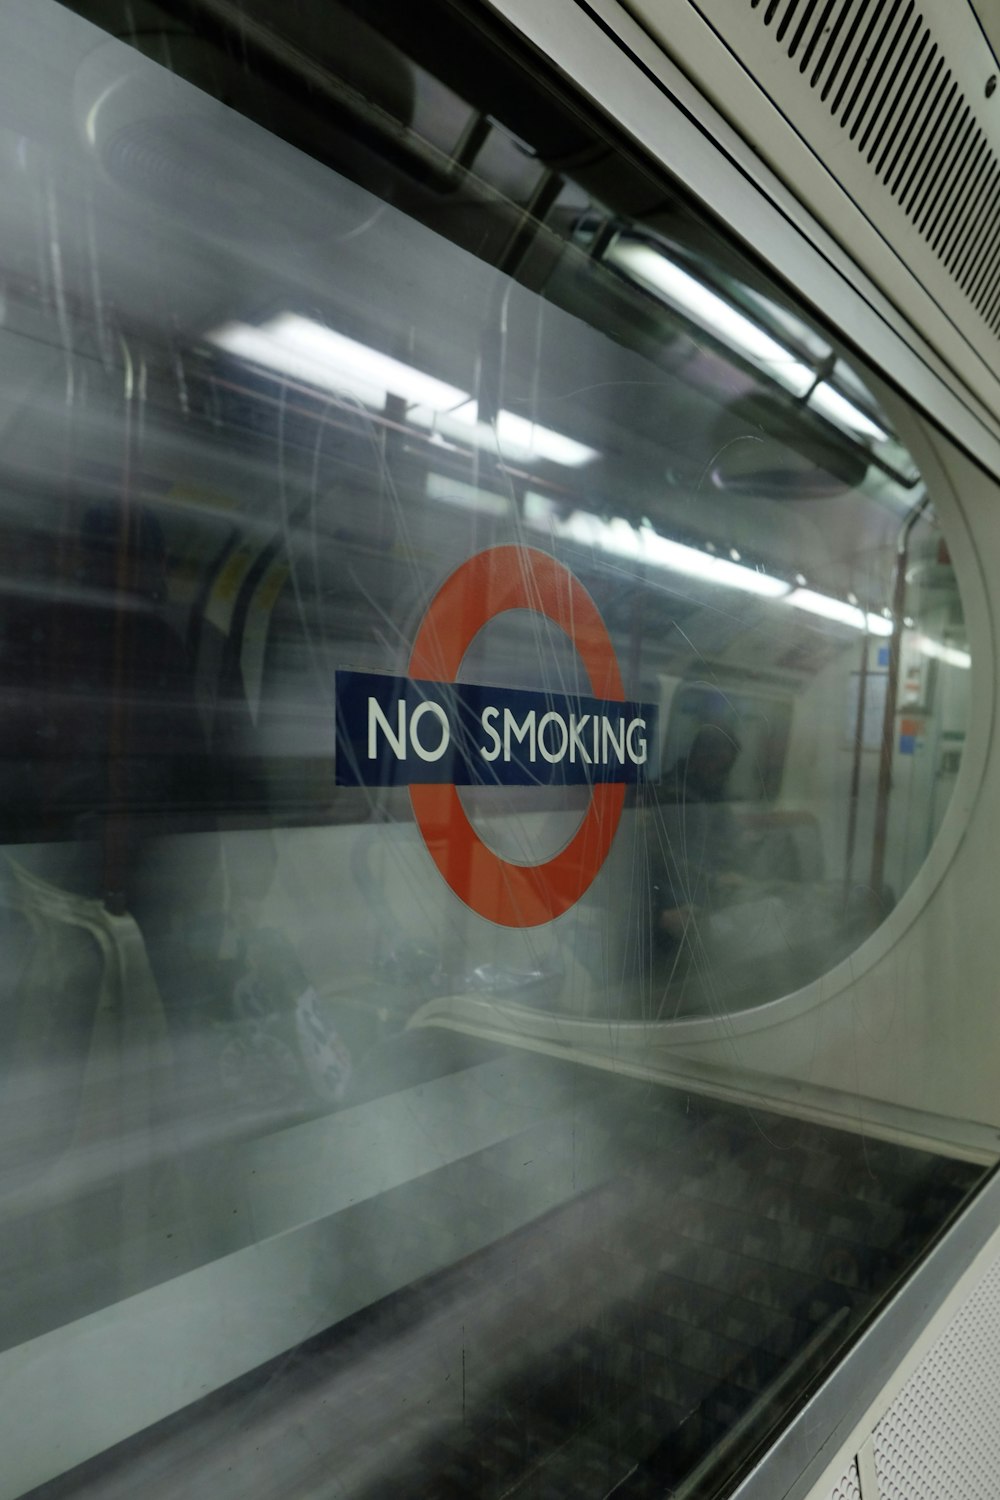 a sign that says no smoking on the side of a train